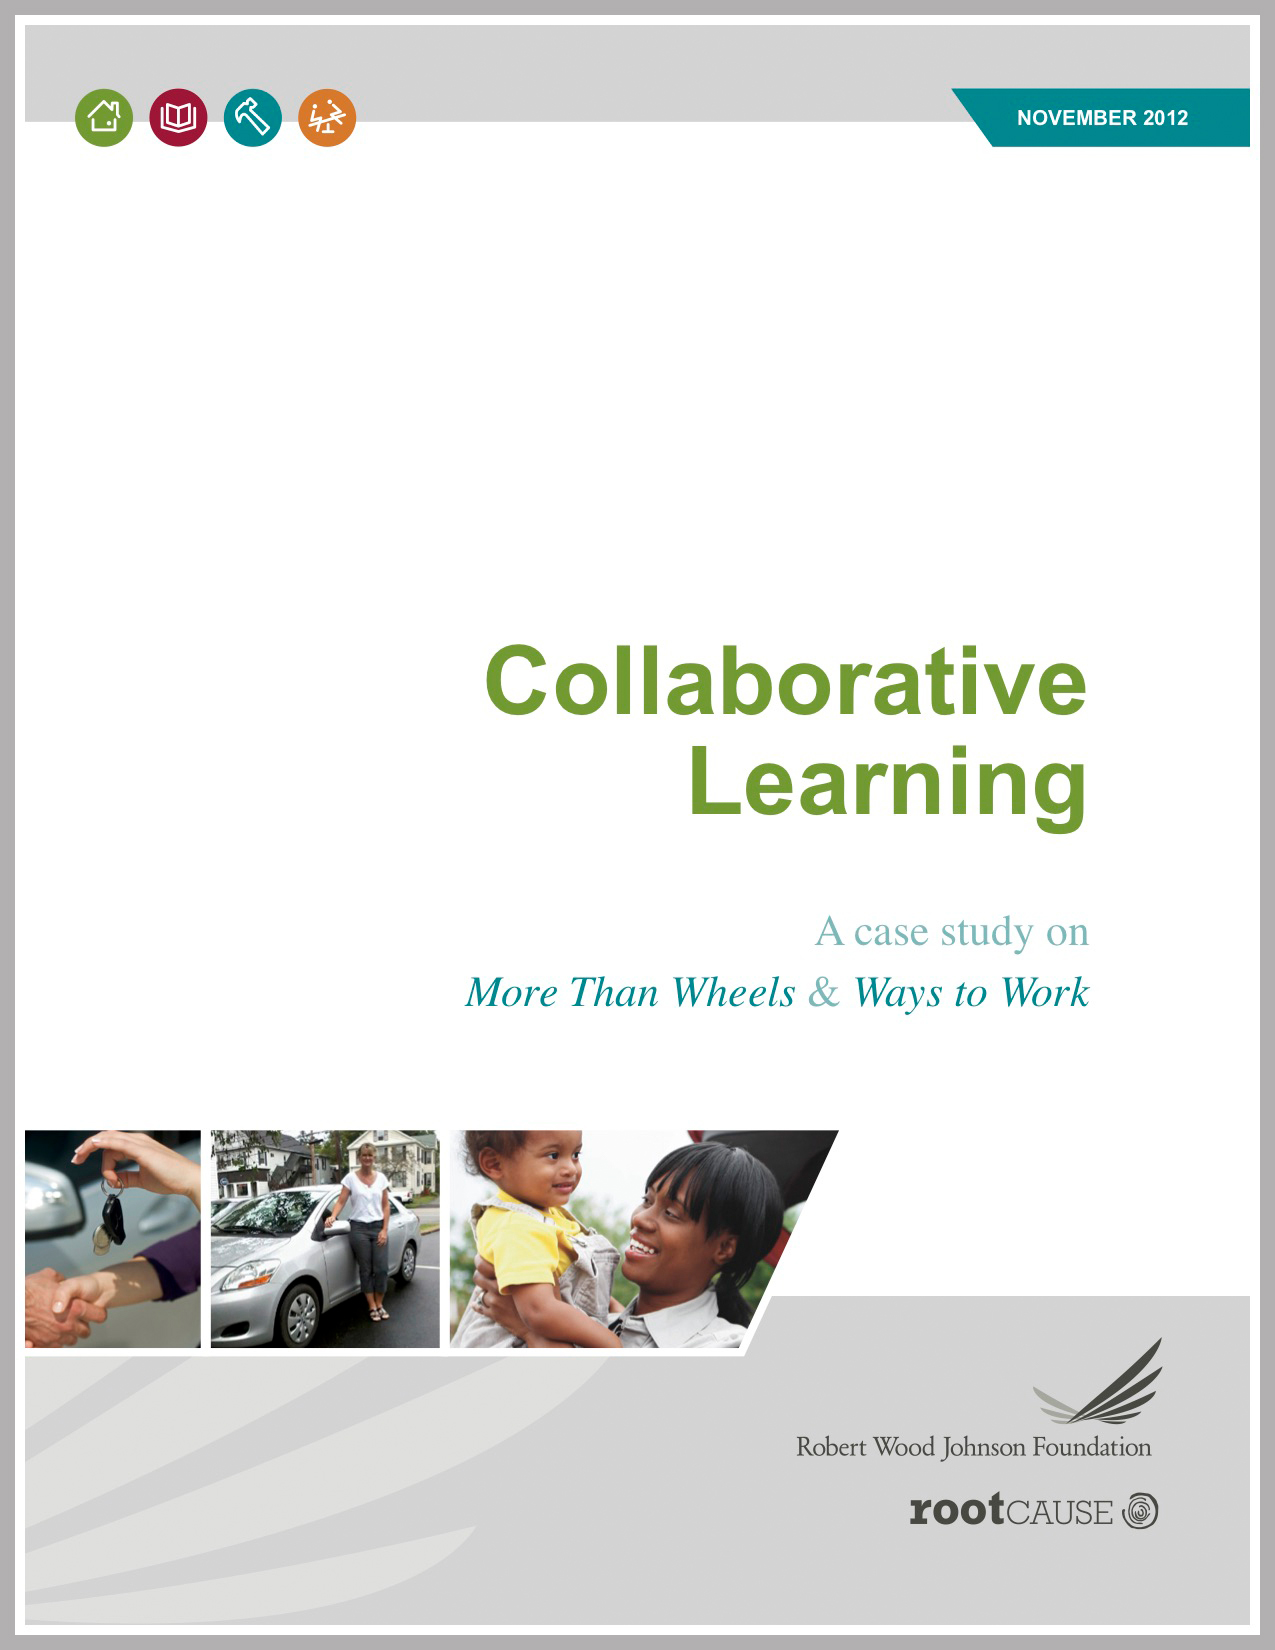 Collaborative Learning: A Case Study on More Than Wheels & Ways to Work